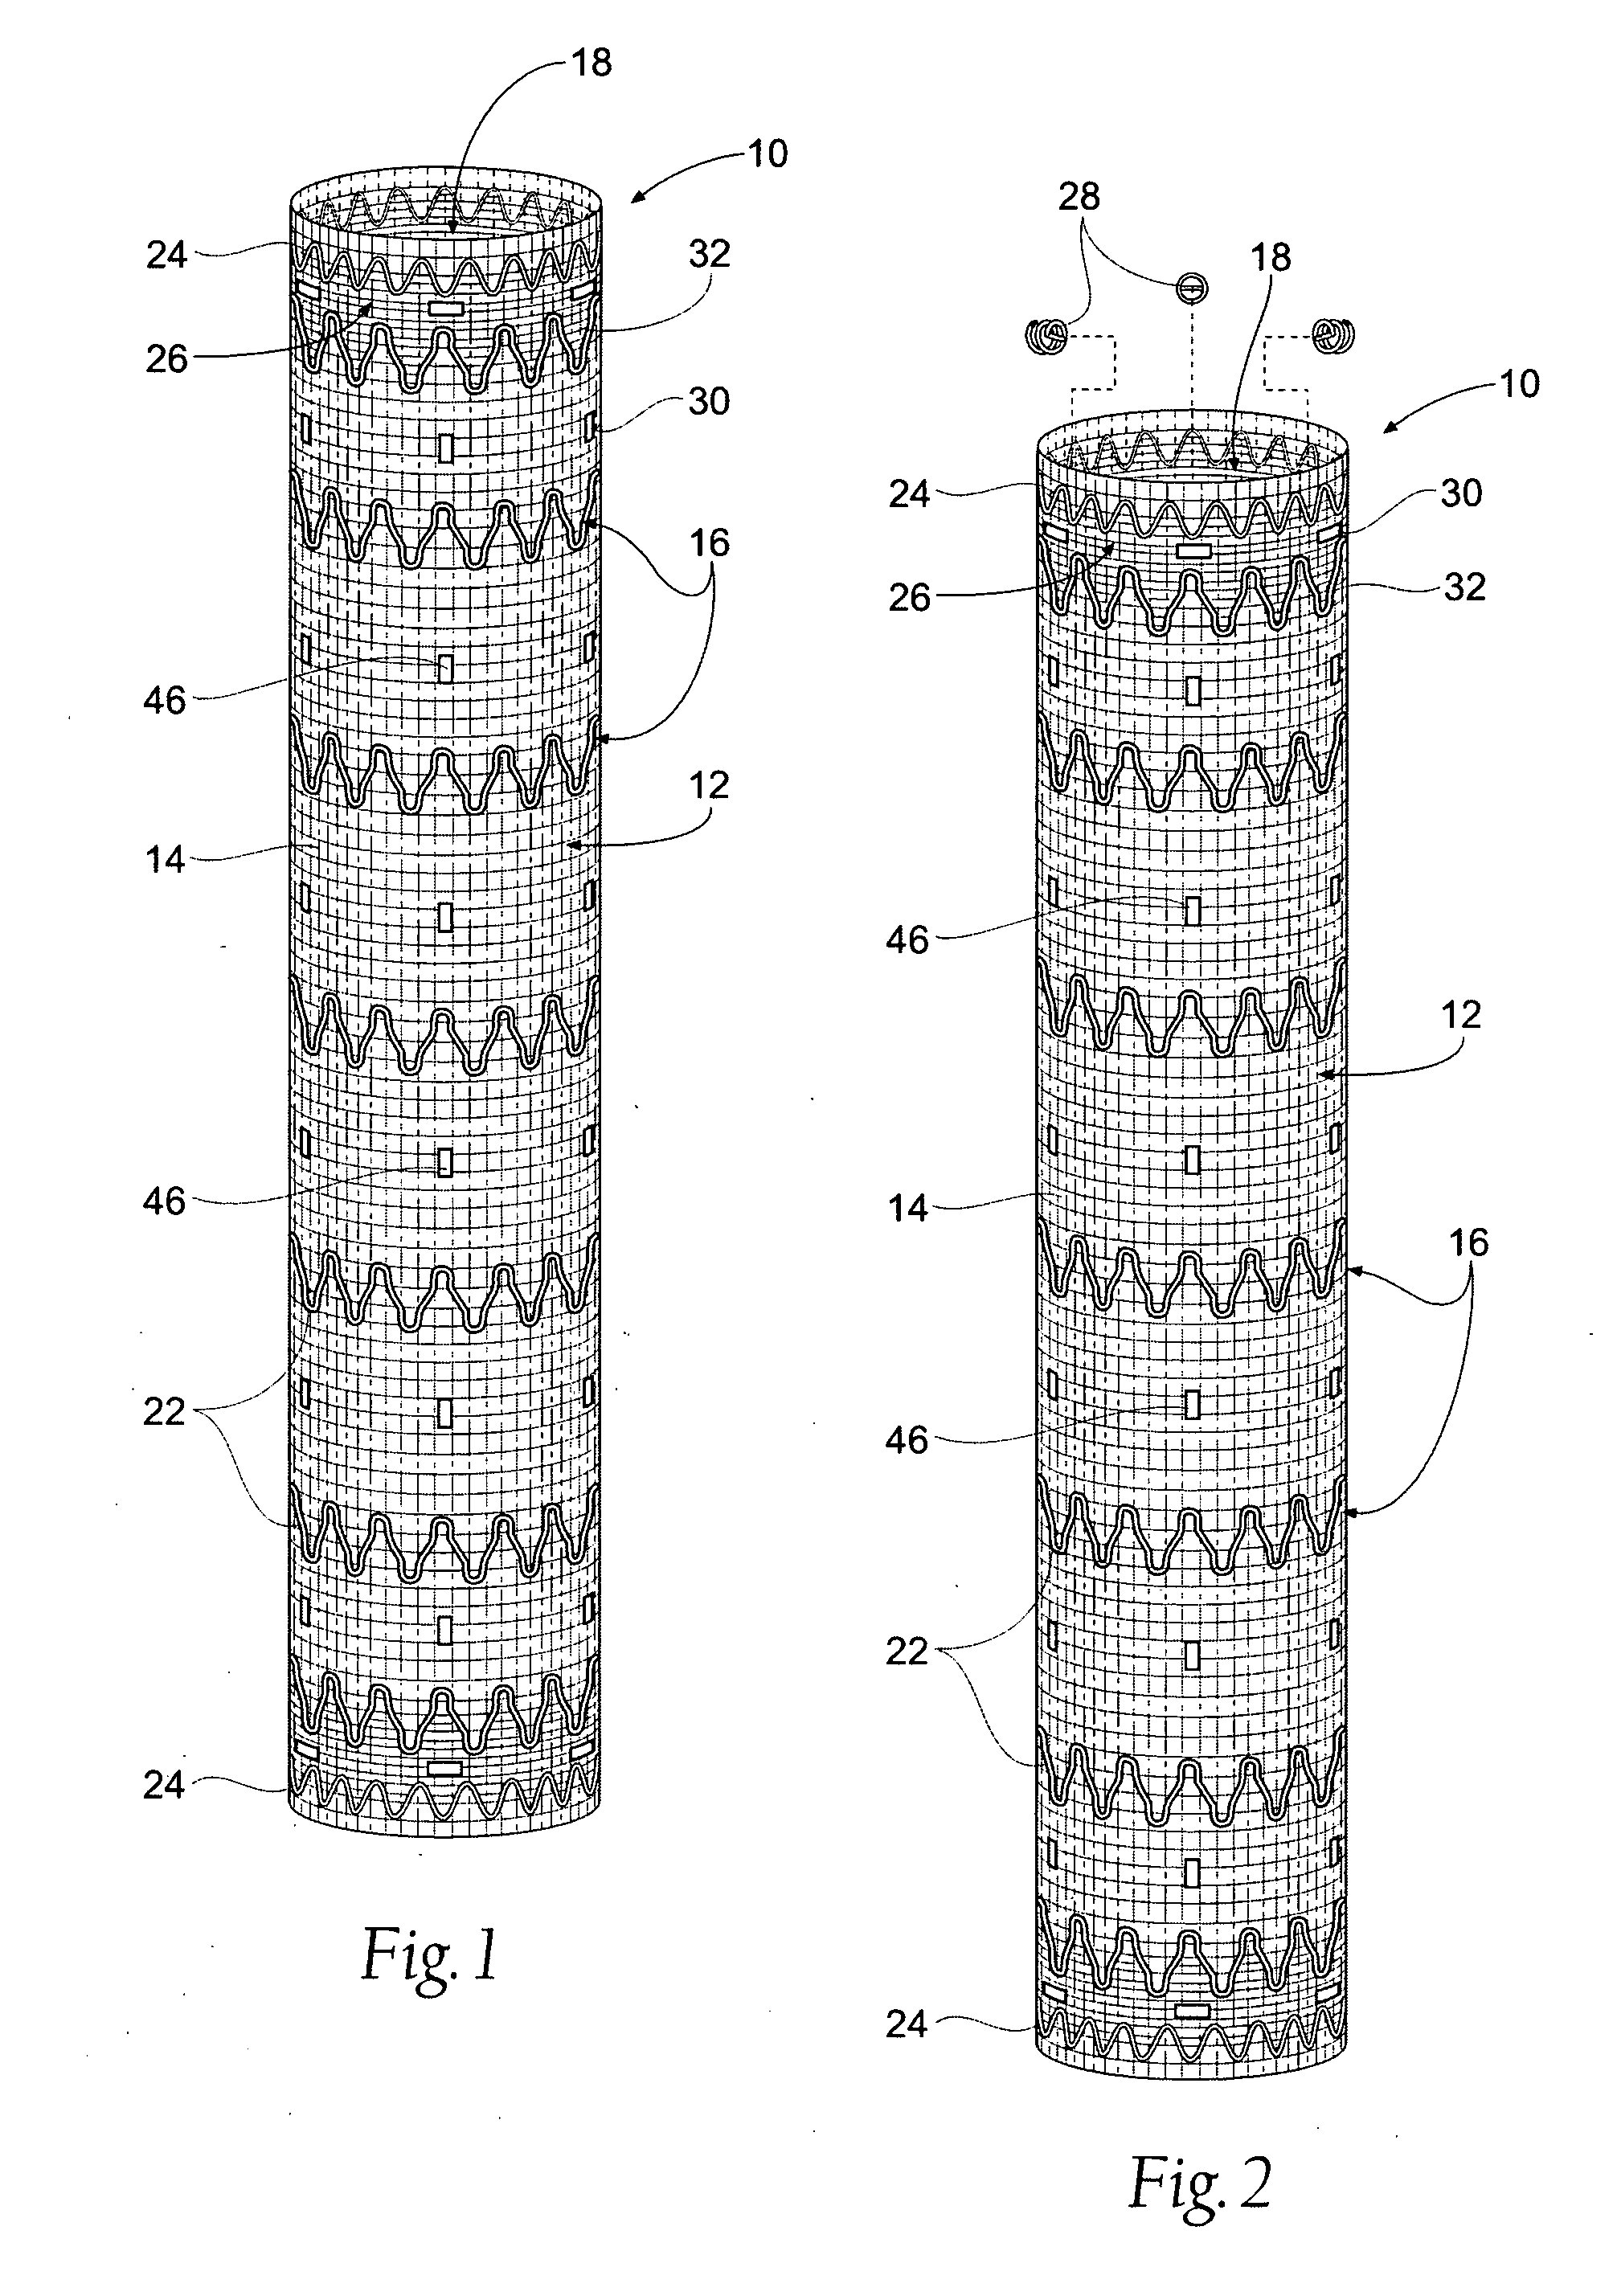 Systems and methods for attaching a prosthesis within a body lumen or hollow organ